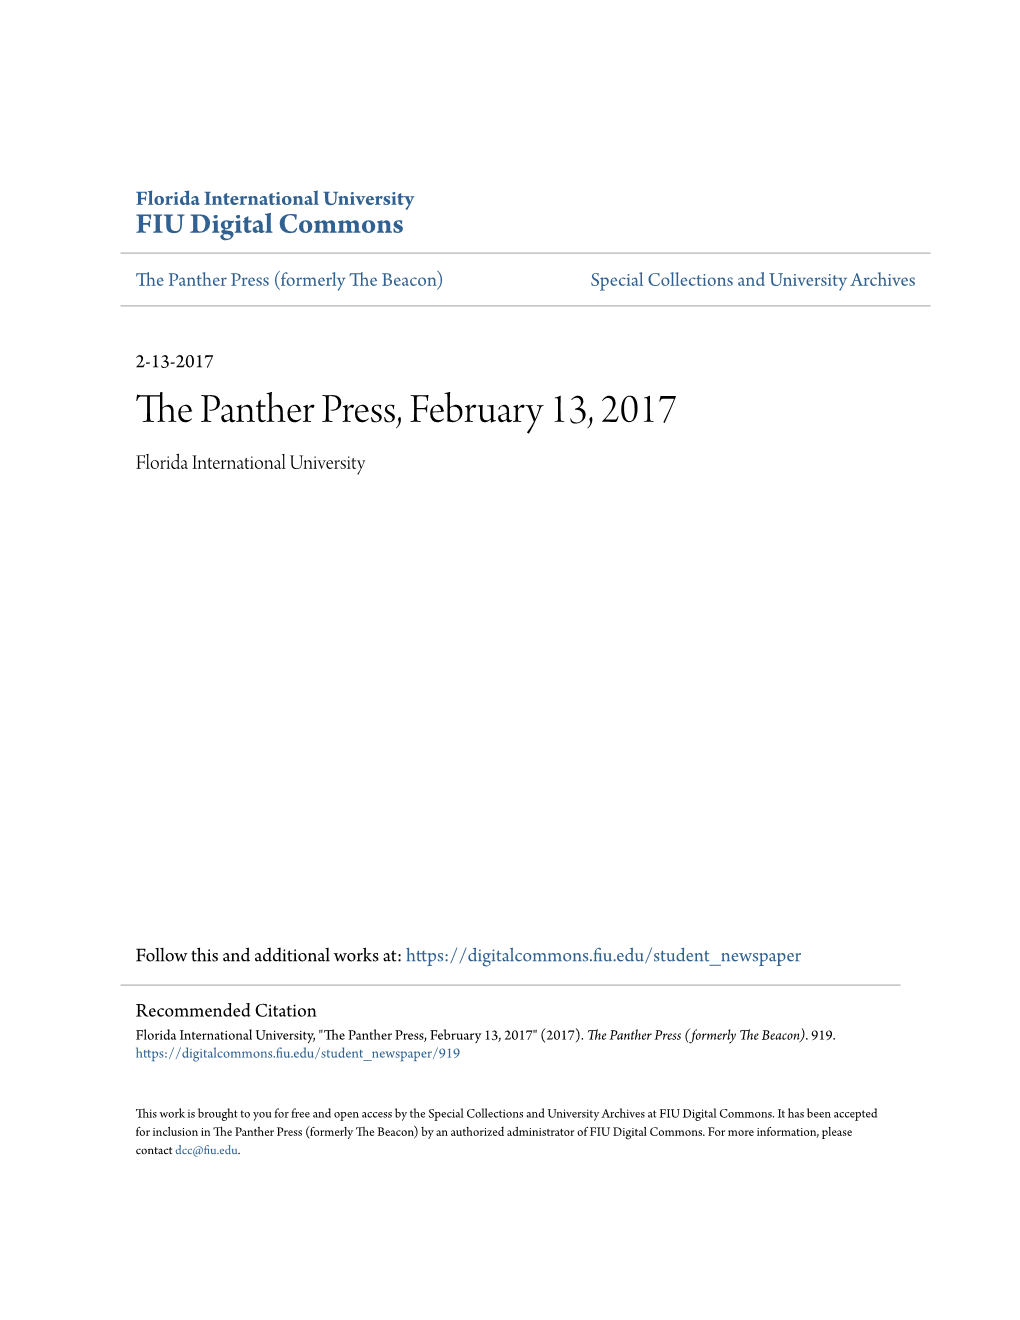 The Panther Press, February 13, 2017